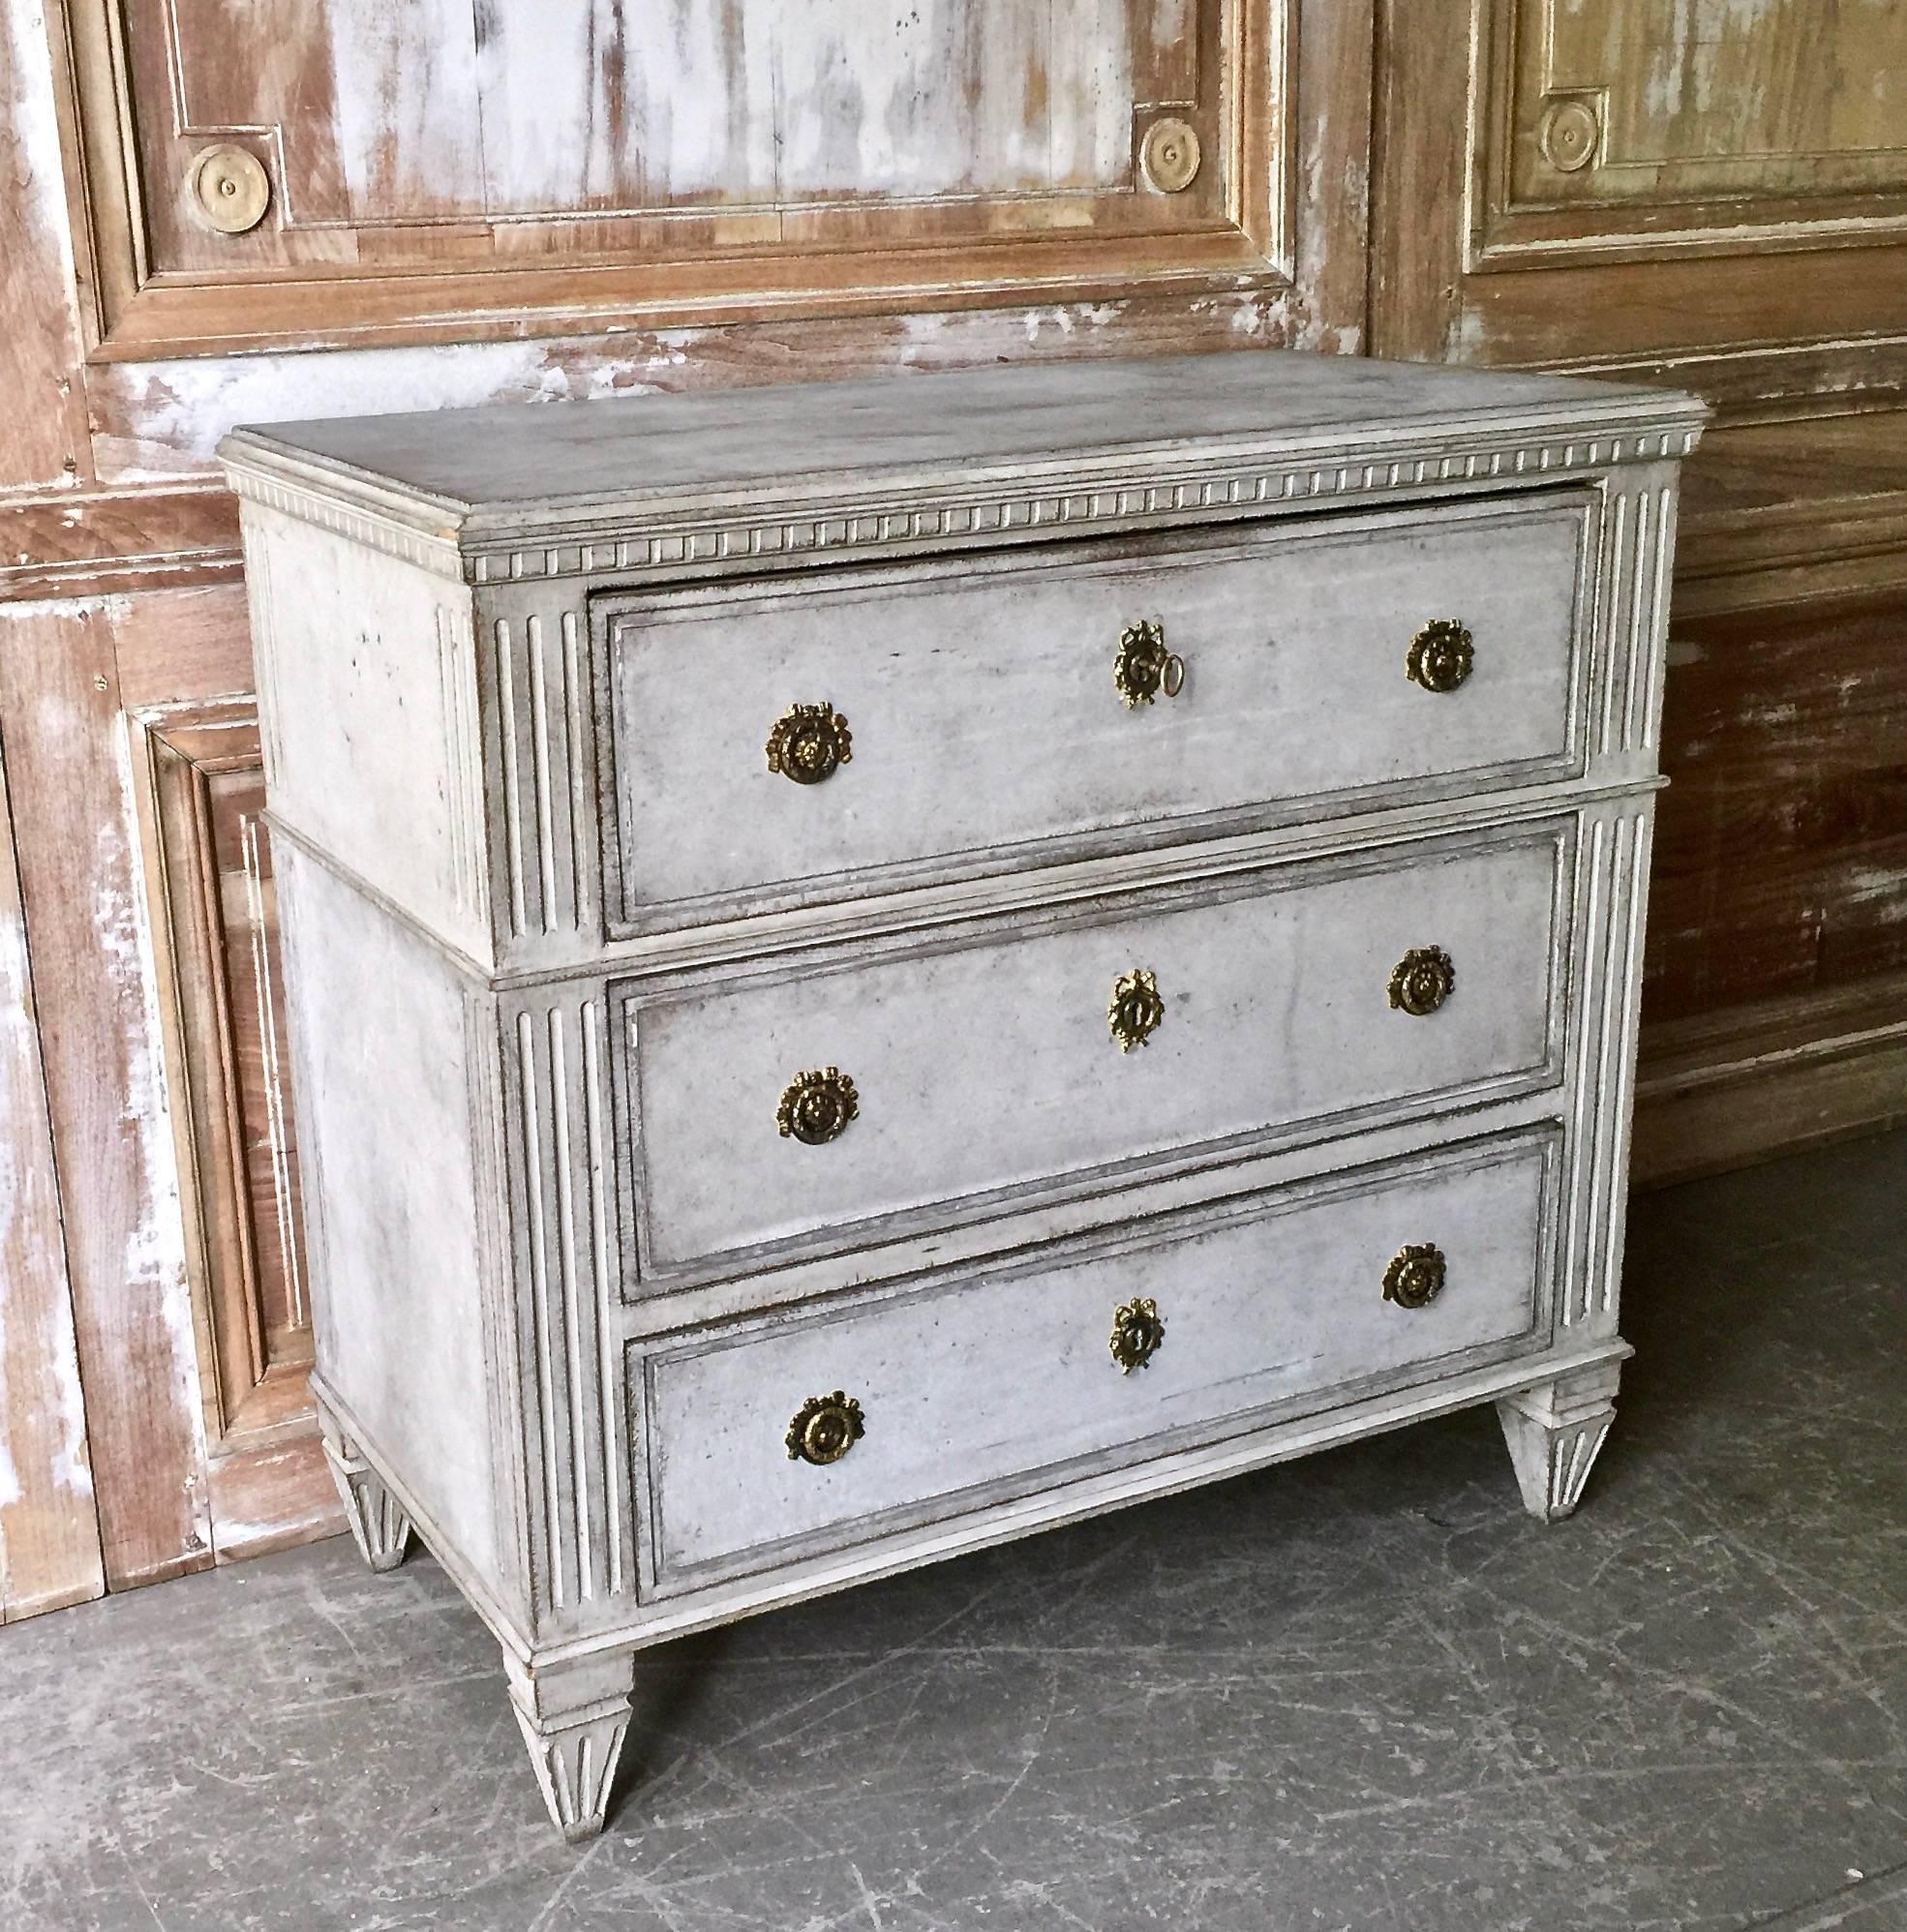 Late Gustavian period chest of drawers with panelled drawer fronts, top with dental trim under reeded corner posts and classical tapered feet. Very classical Swedish piece in newer pale blue color. Sweden, circa 1820
More than ever, we selected the